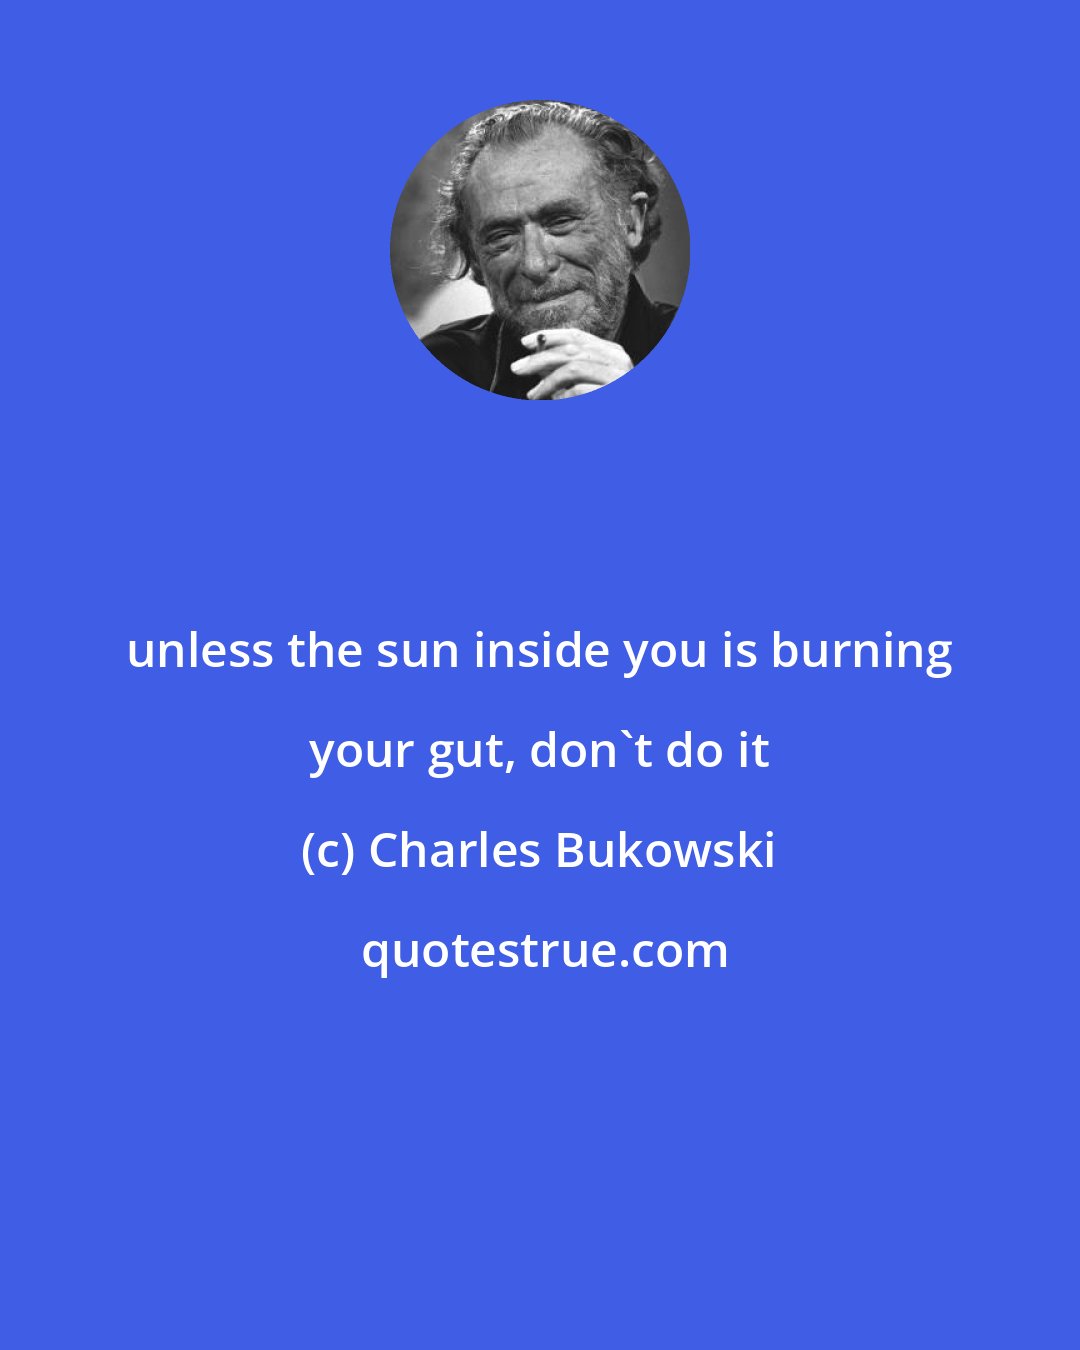 Charles Bukowski: unless the sun inside you is burning your gut, don't do it